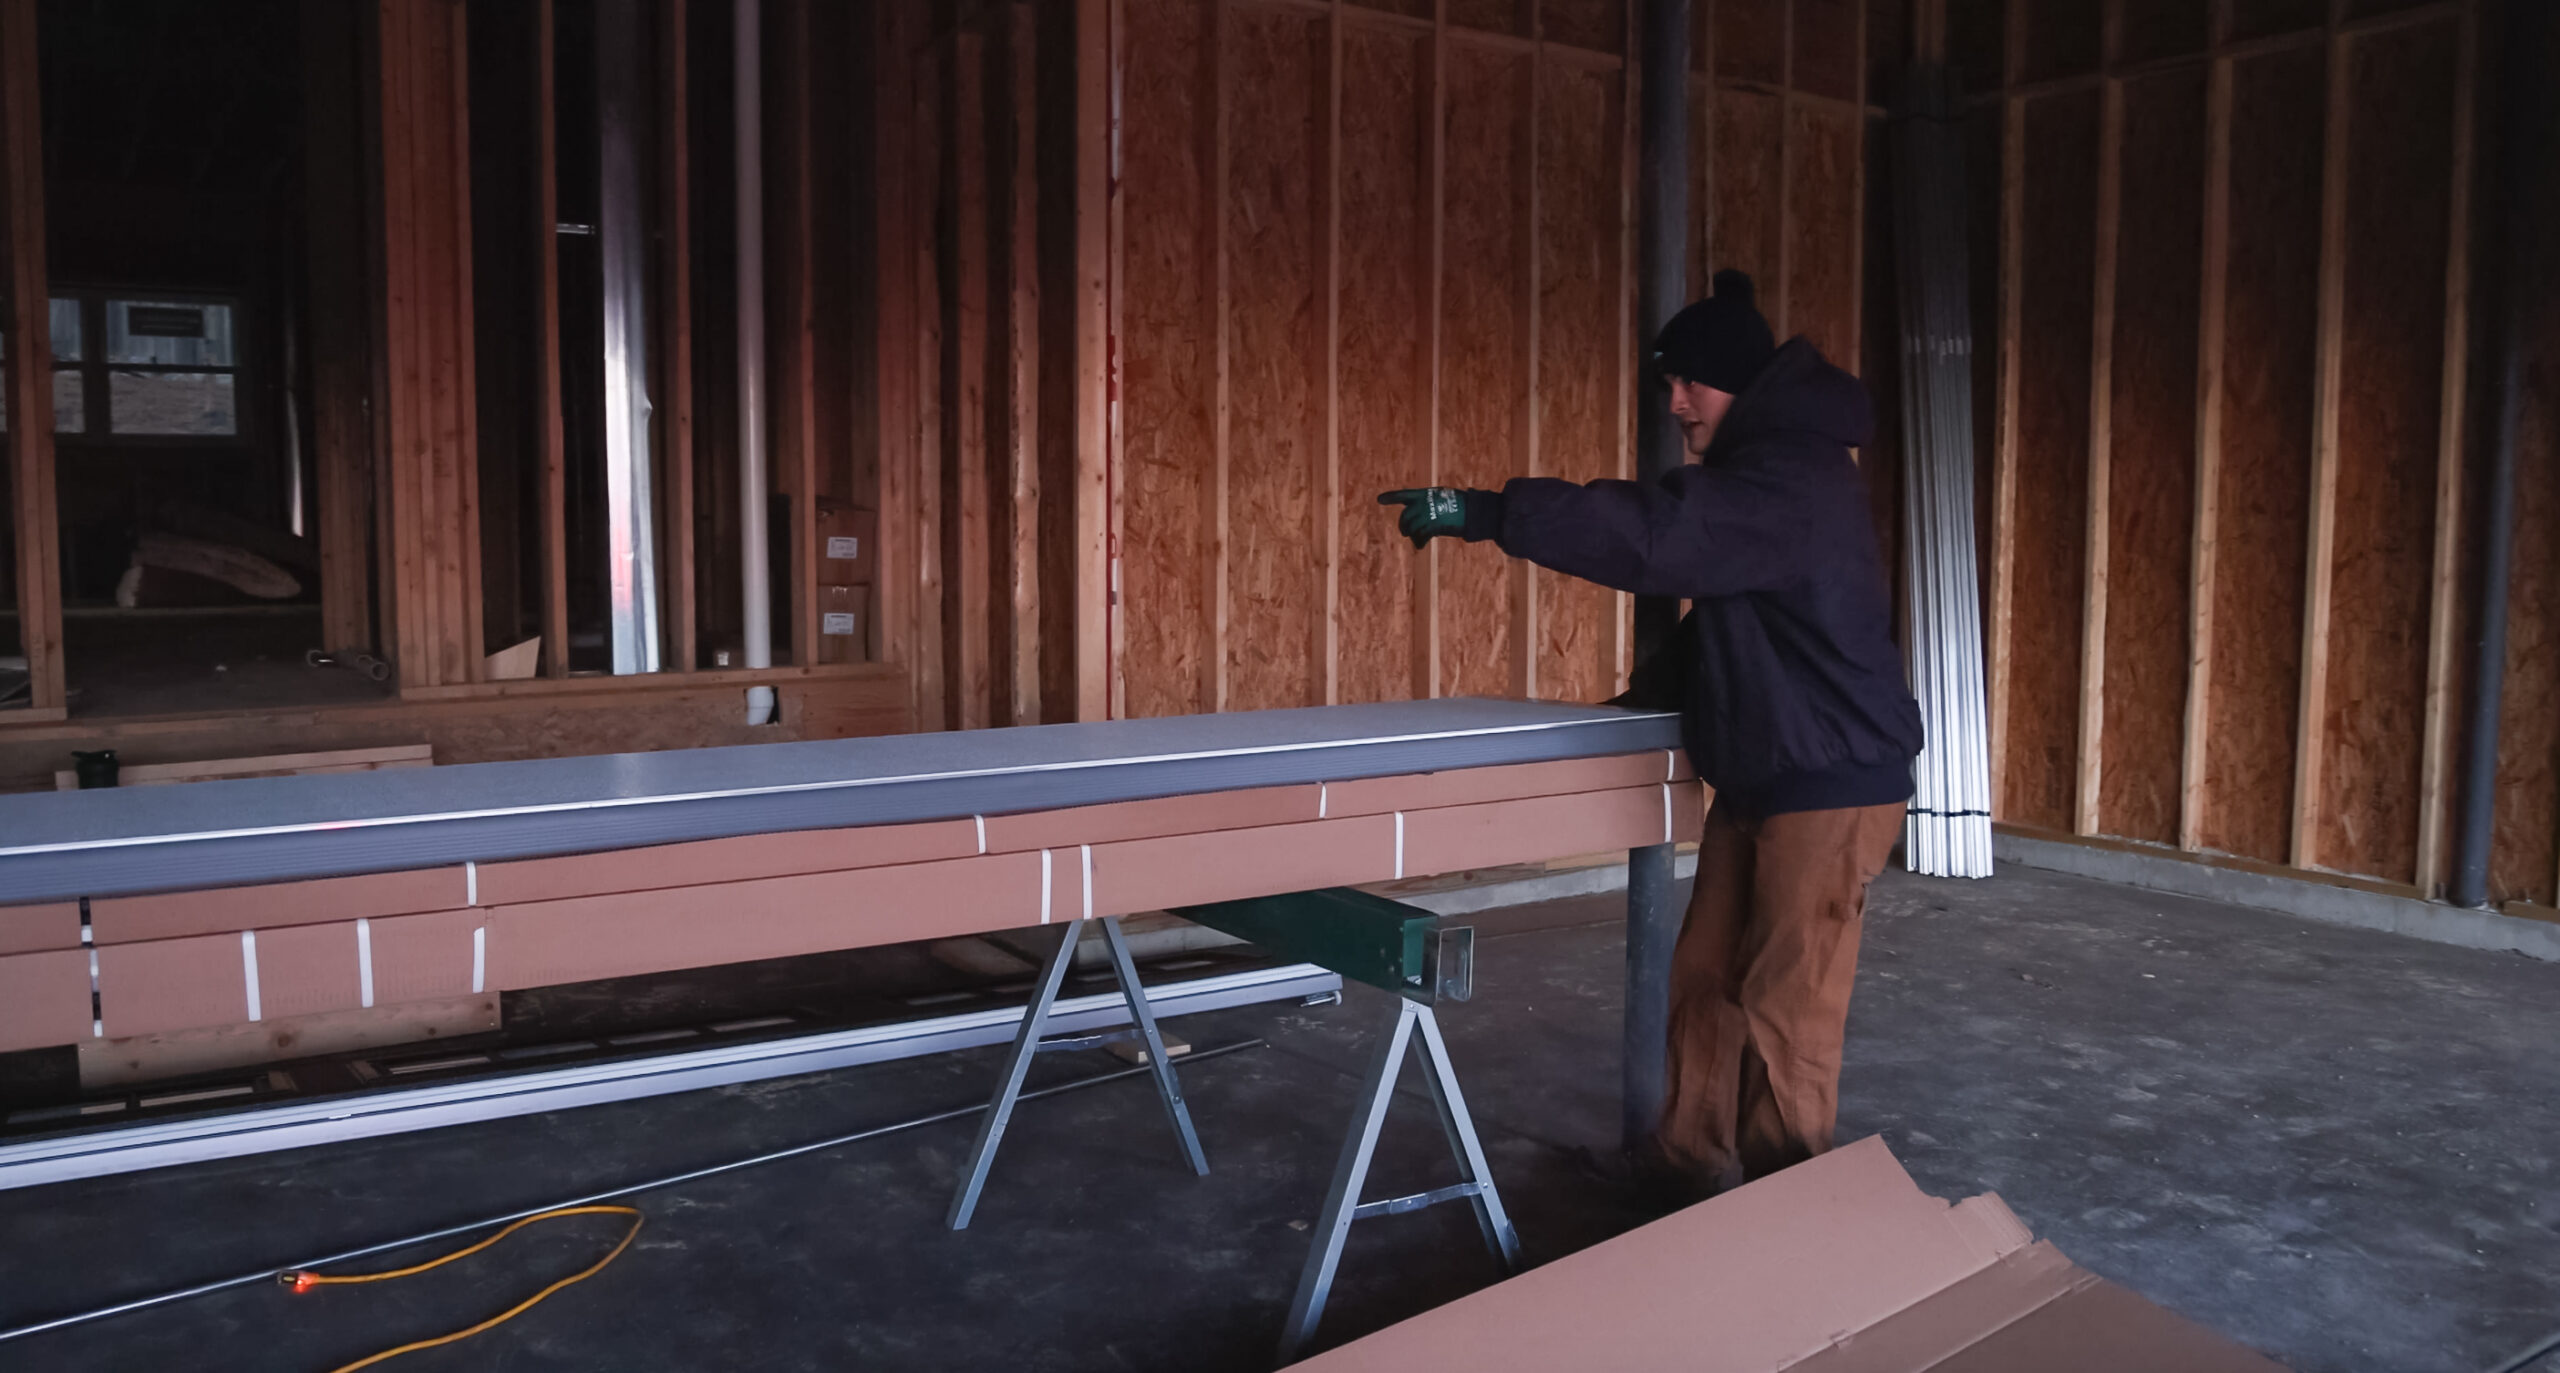 A man working on a piece of wood in an unfinished room